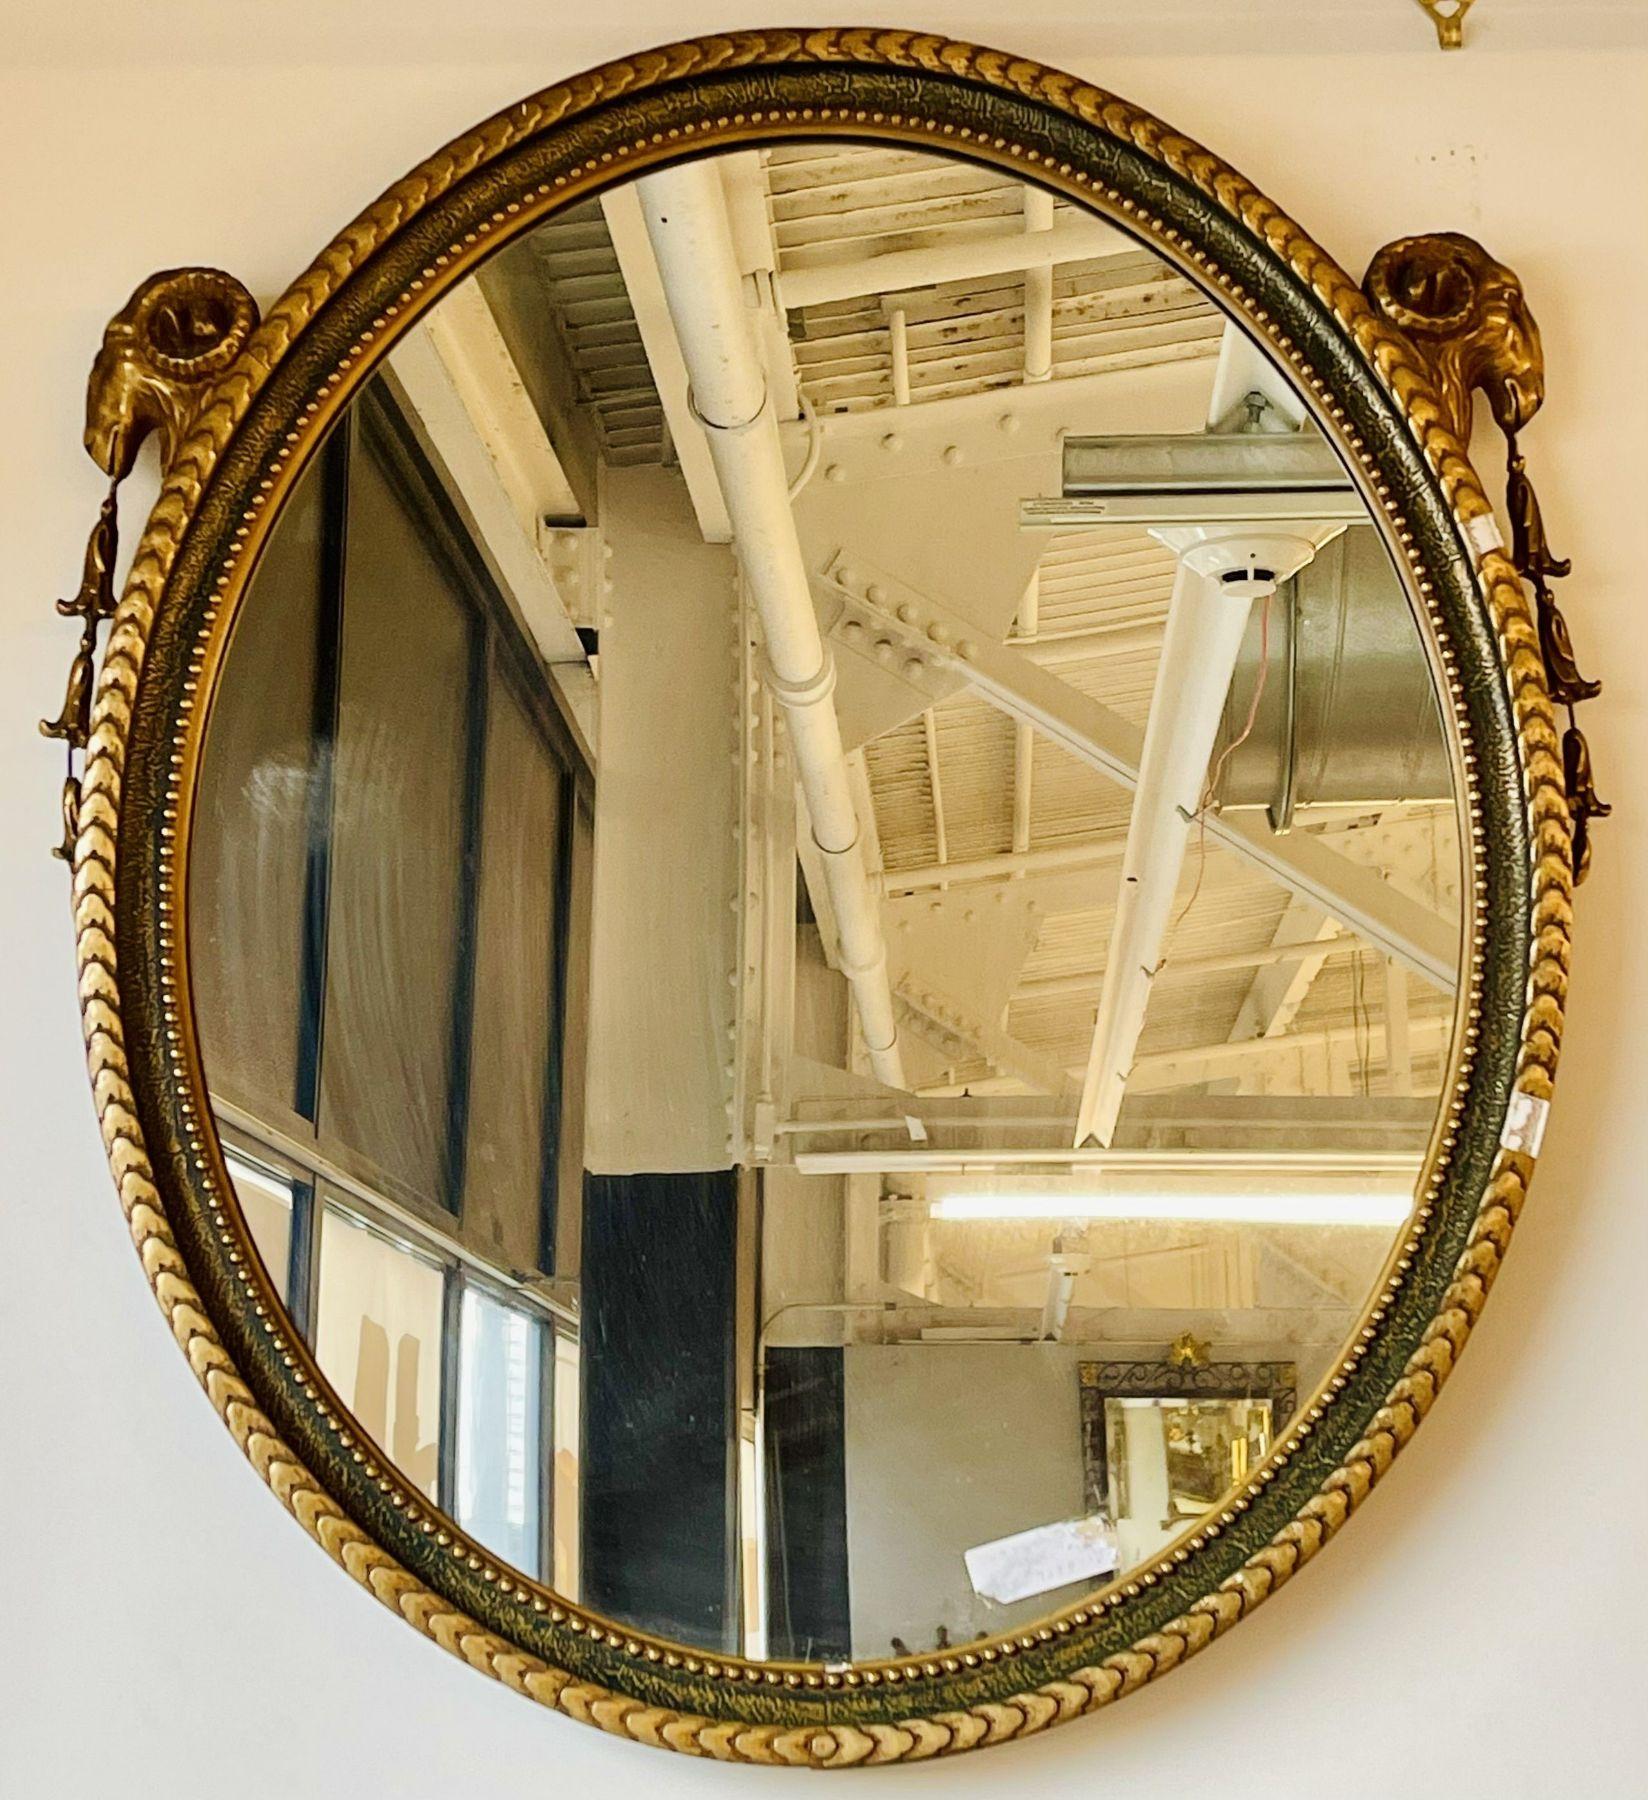 A beautiful French neoclassical style oval mirror with whimsical rams' heads design, circa 1950s, the oval glass surmounted in a painted and gilded frame decorated with annulated beadings, the top having a ram's head on each side.